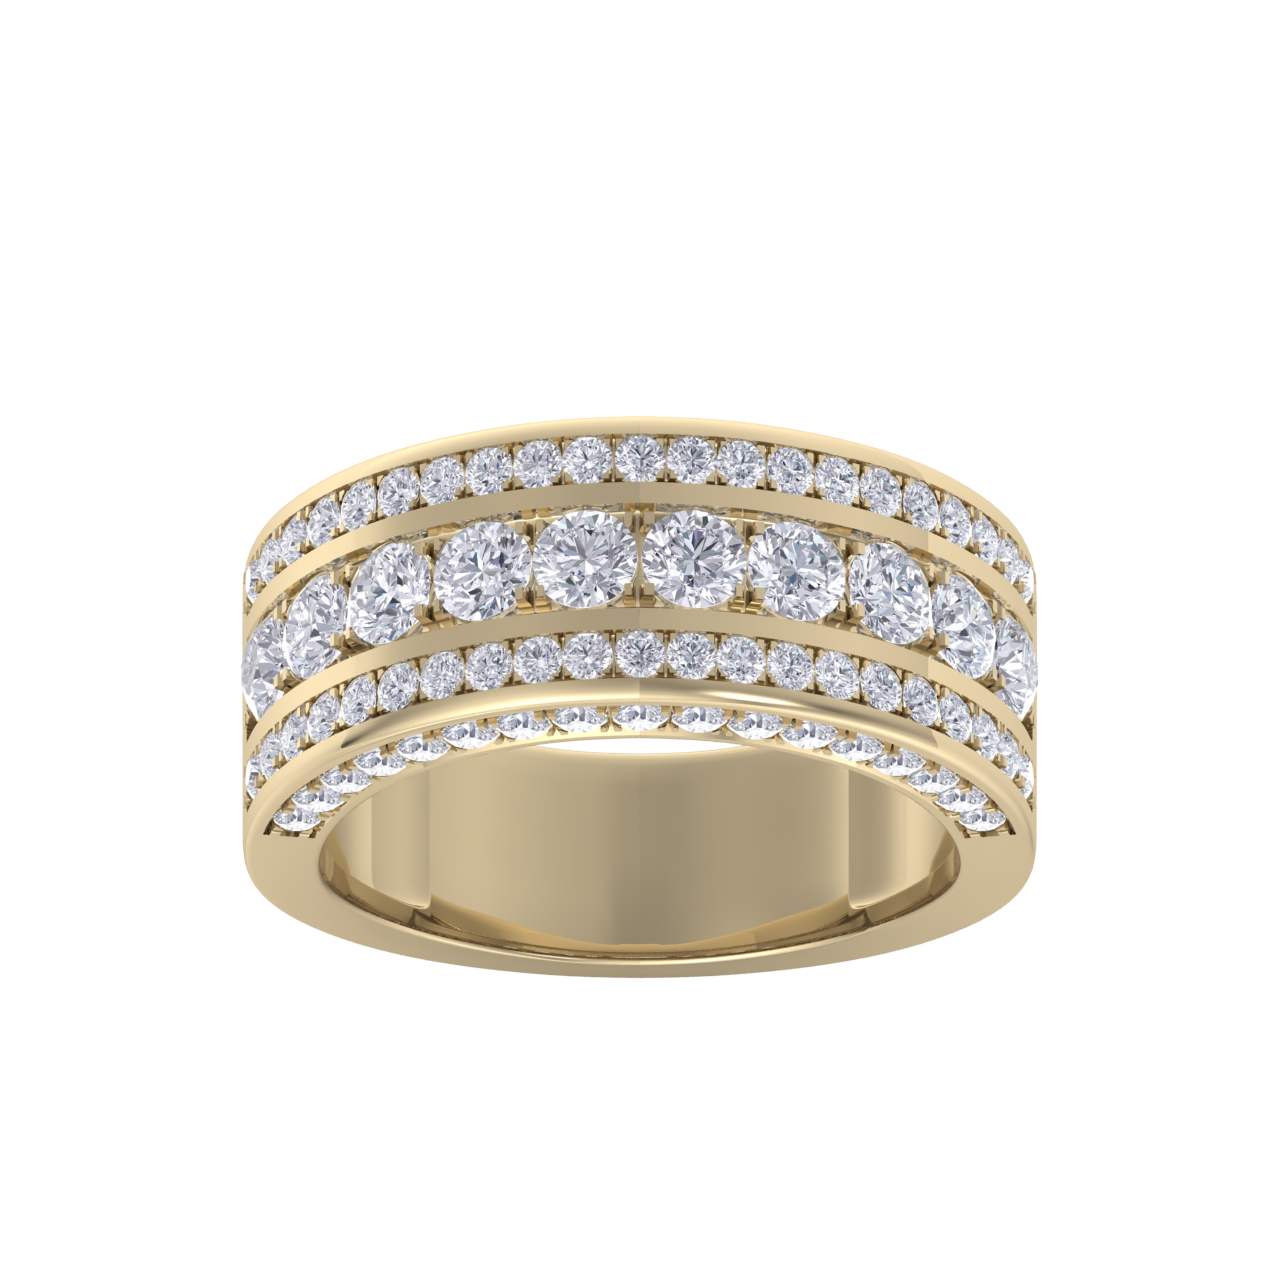 Five row diamond ring in yellow gold with white diamonds of 1.39 ct in weight
